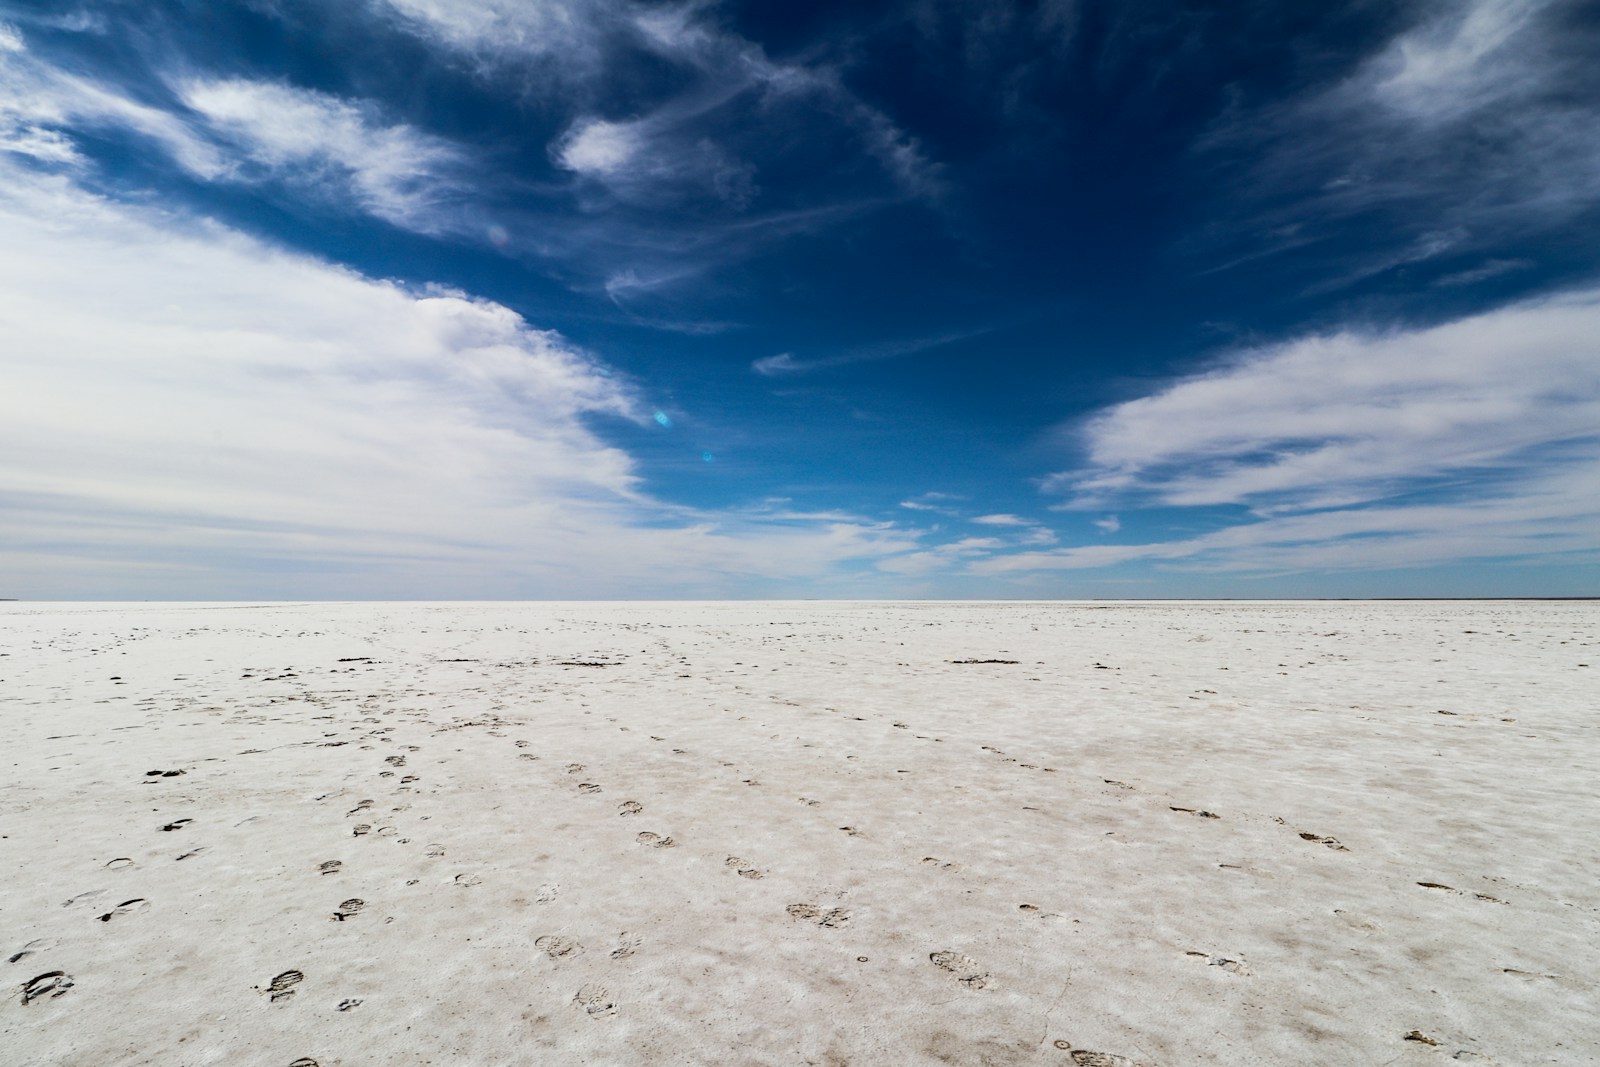 a vast expanse of white sand with footprints in the sand